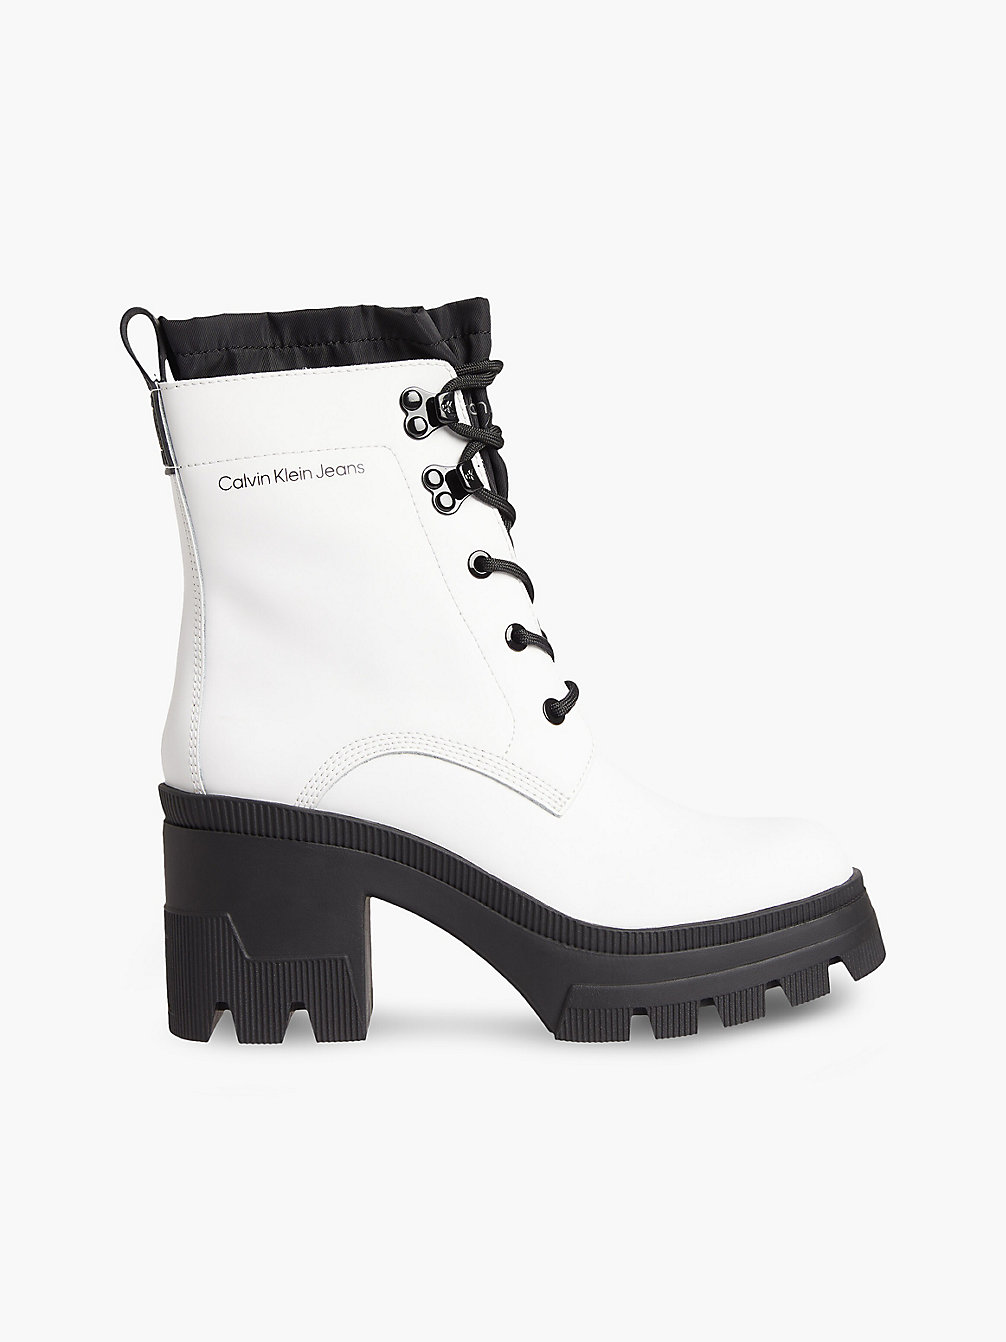 BRIGHT WHITE Leather Chunky Heeled Boots undefined women Calvin Klein